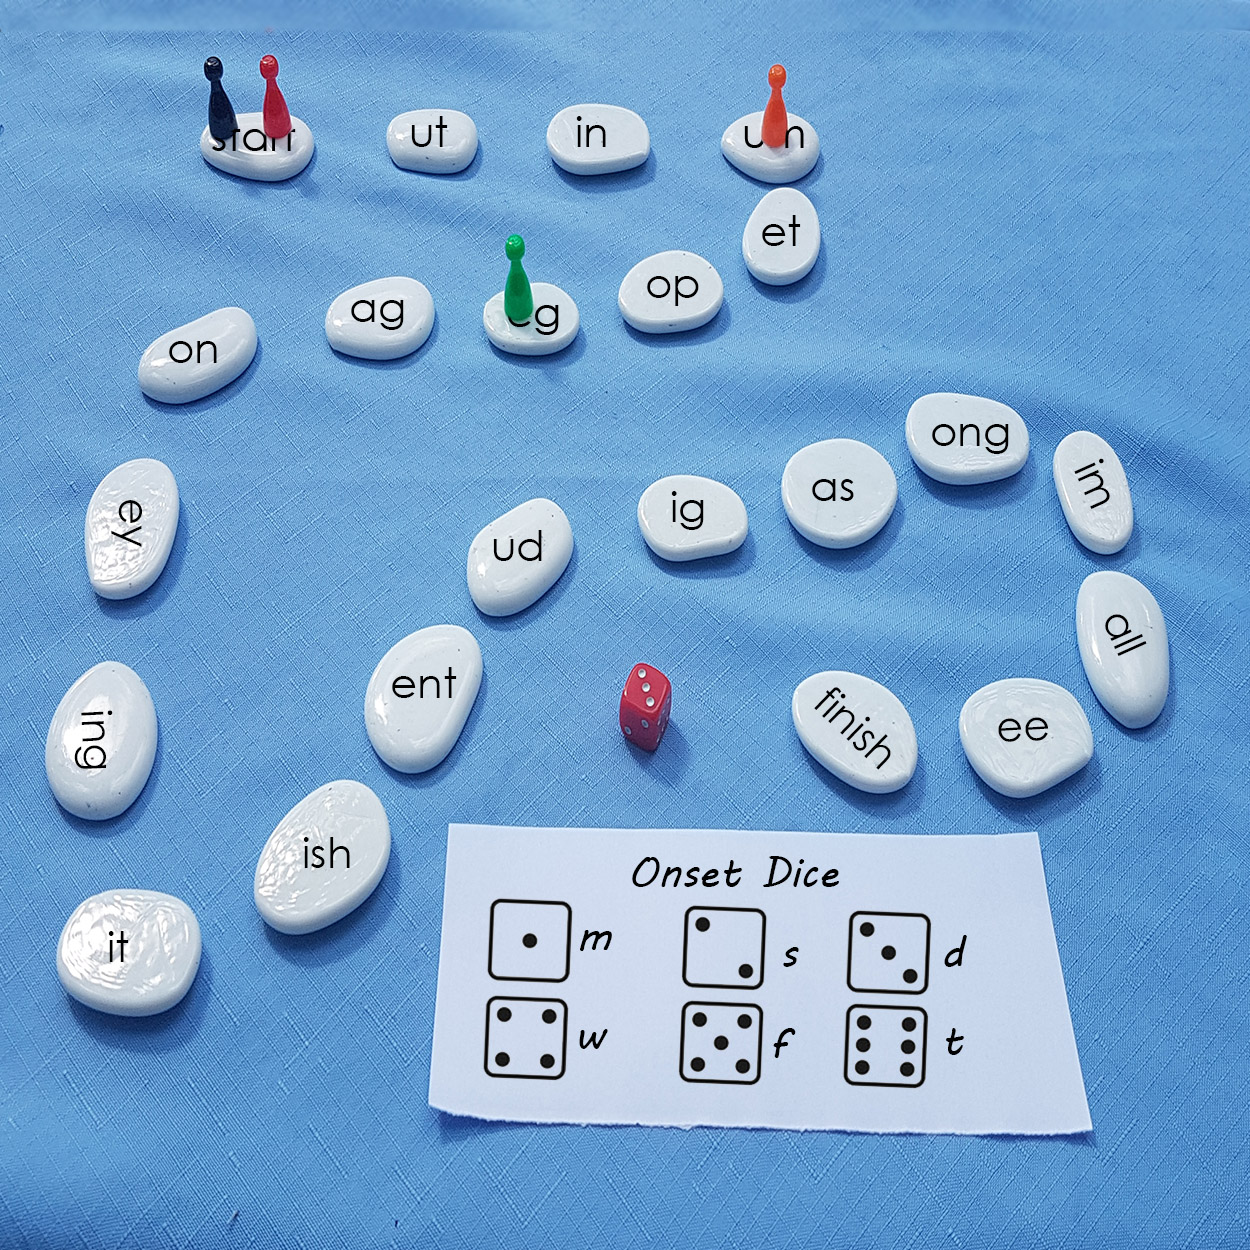 A fun phonics lesson that provides opportunities for students to practise blending onset and rime to create a word. Here we have a game board made out of pebbles from the garden, with rimes written on them and a dice legend at the bottom with the onsets they need to practise.